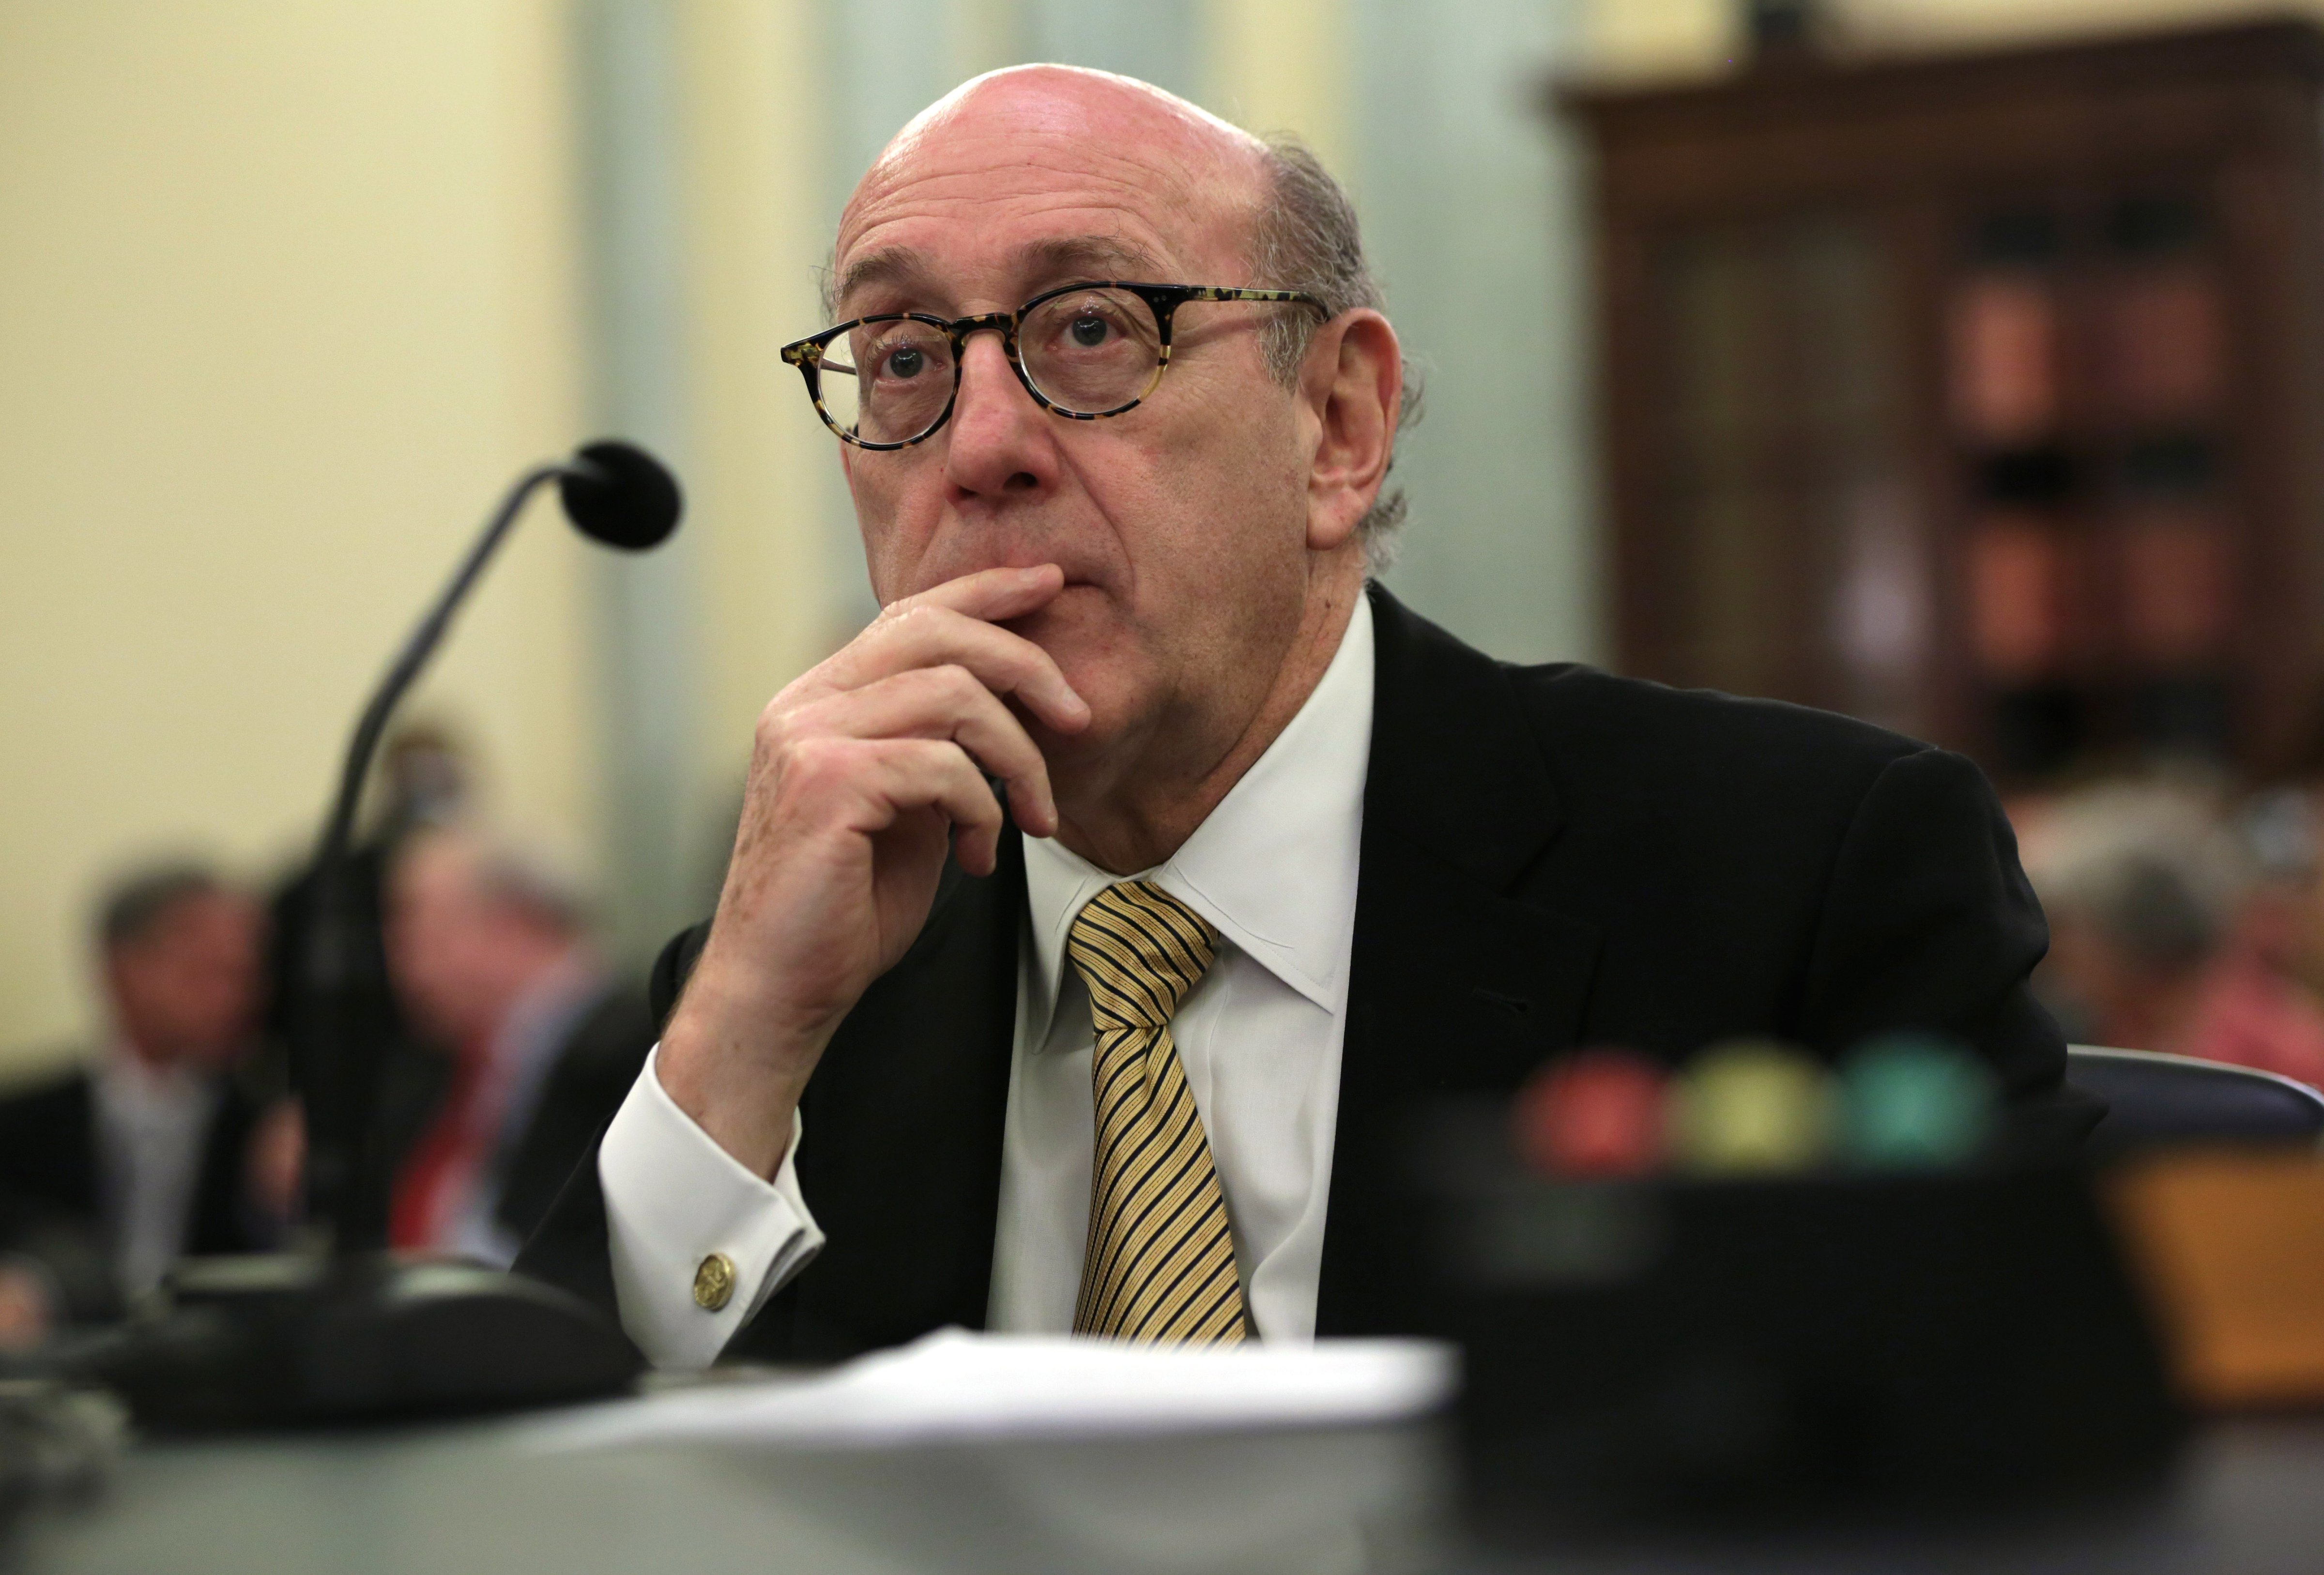 Attorney Kenneth Feinberg testifies during a hearing before the Consumer Protection, Product Safety, and Insurance Subcommittee of the Senate Commerce, Science and Transportation Committee July 17, 2014 on Capitol Hill in Washington, DC. The subcommittee held hearing on 